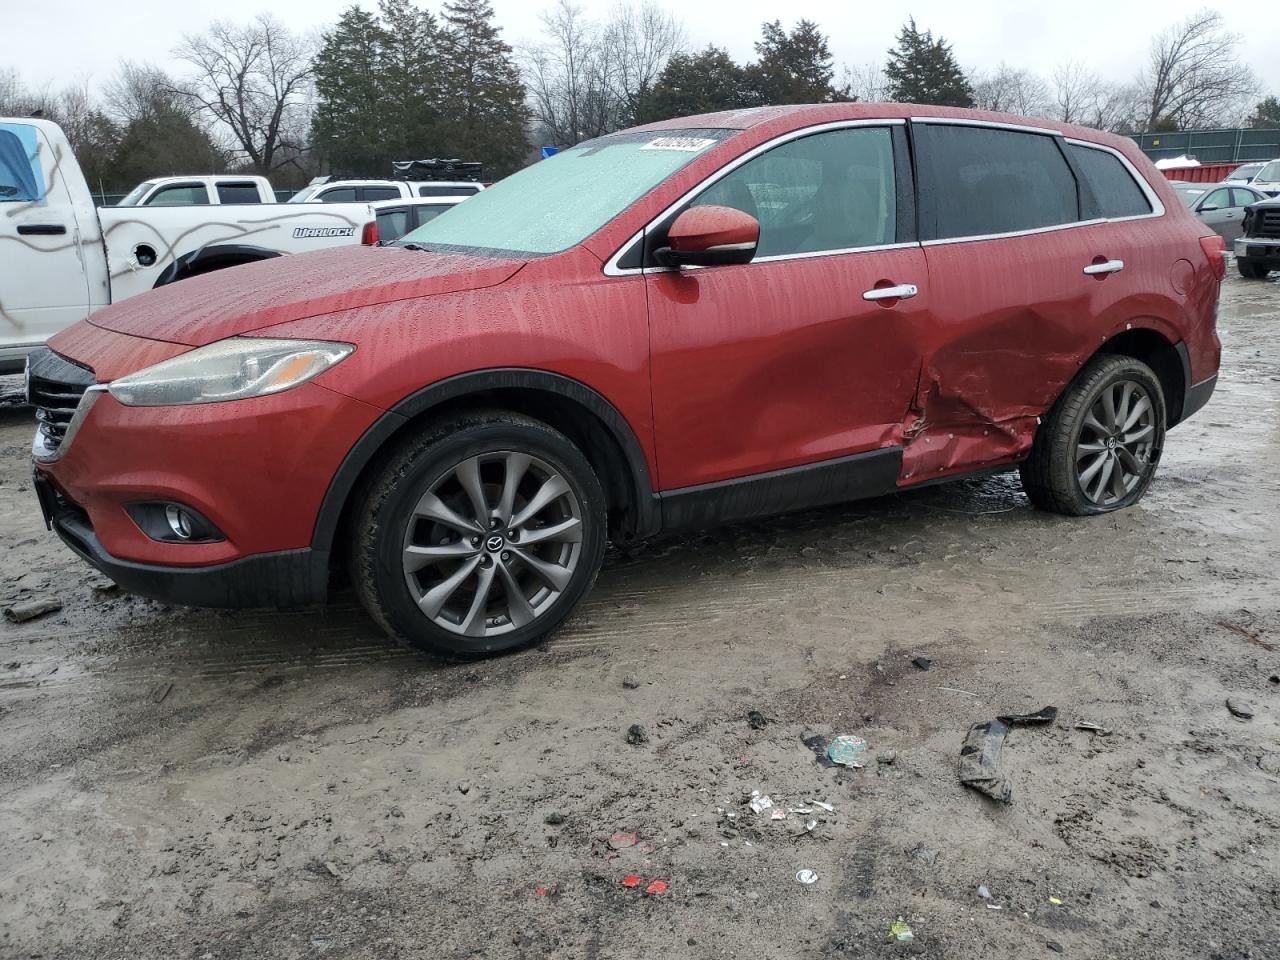 vin: JM3TB3DV6E0438471 JM3TB3DV6E0438471 2014 mazda cx-9 3700 for Sale in 37354 6763, Tn - Knoxville, Madisonville, USA